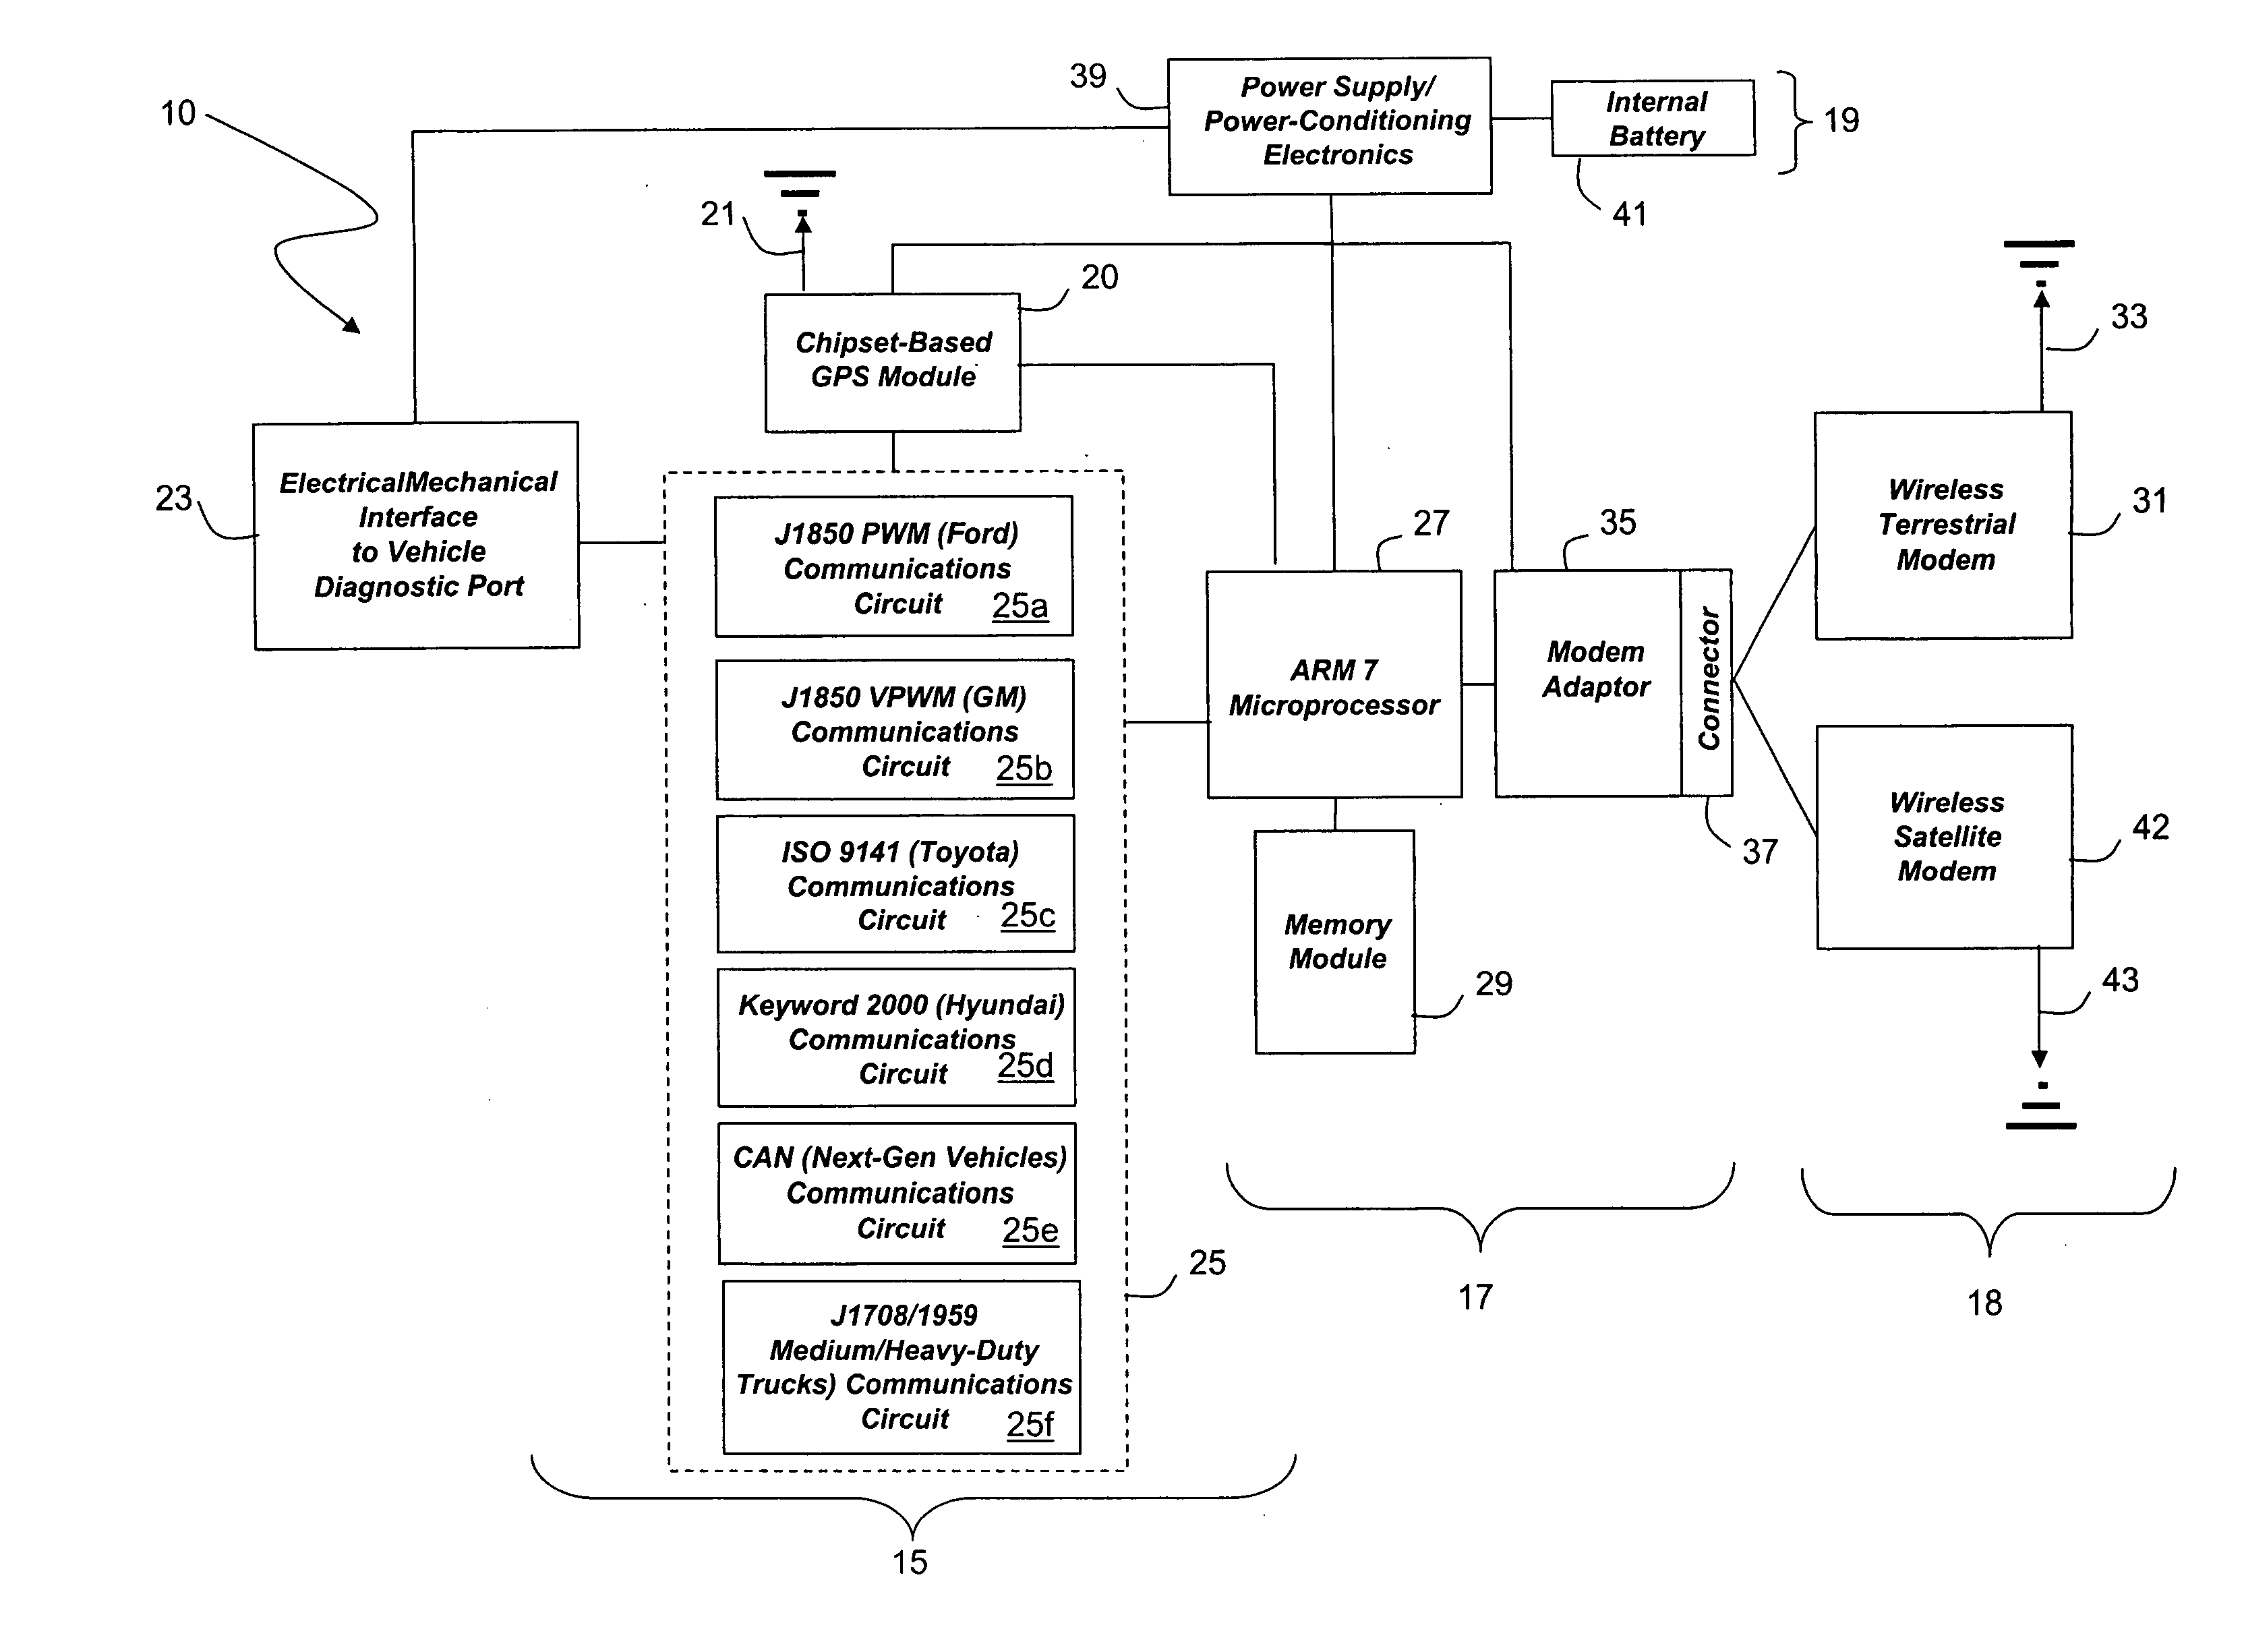 Wireless vehicle-monitoring system operating on both terrestrial and satellite networks